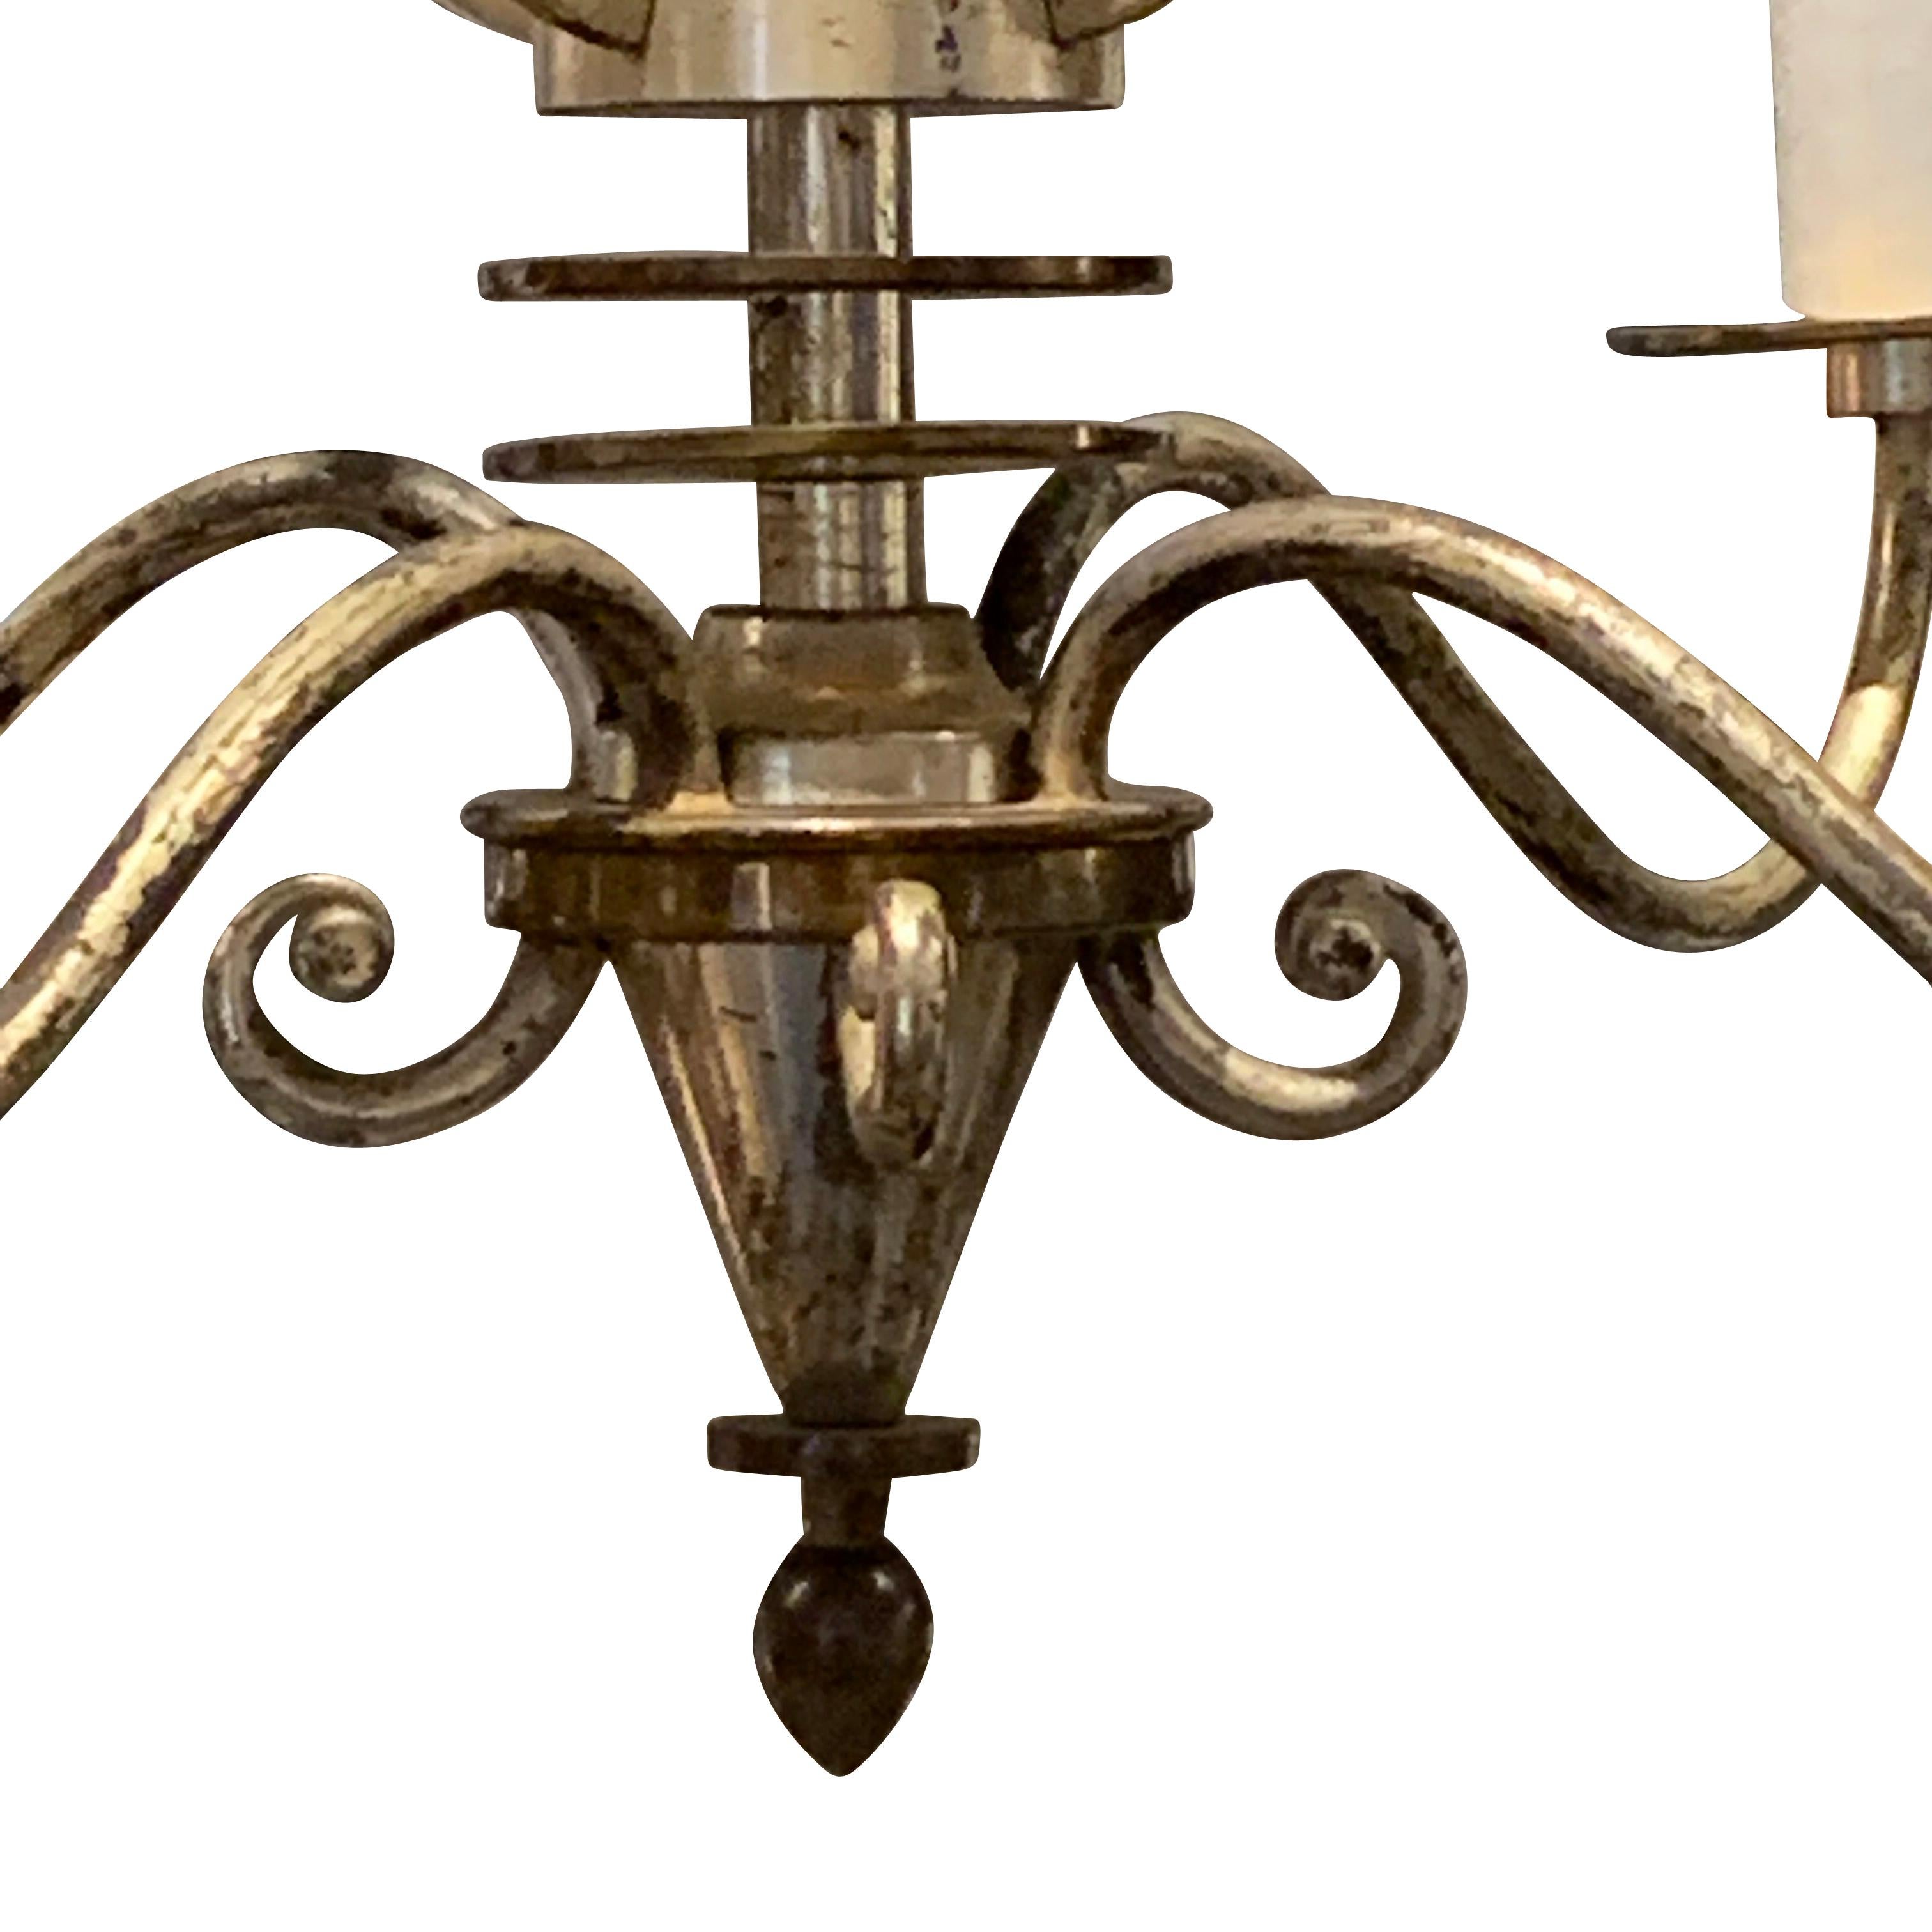 1940s French silver and bronze four arm chandelier.
Decorative harp design center column.
Newly rewired
Candelabra bulbs
Fixture height only 19